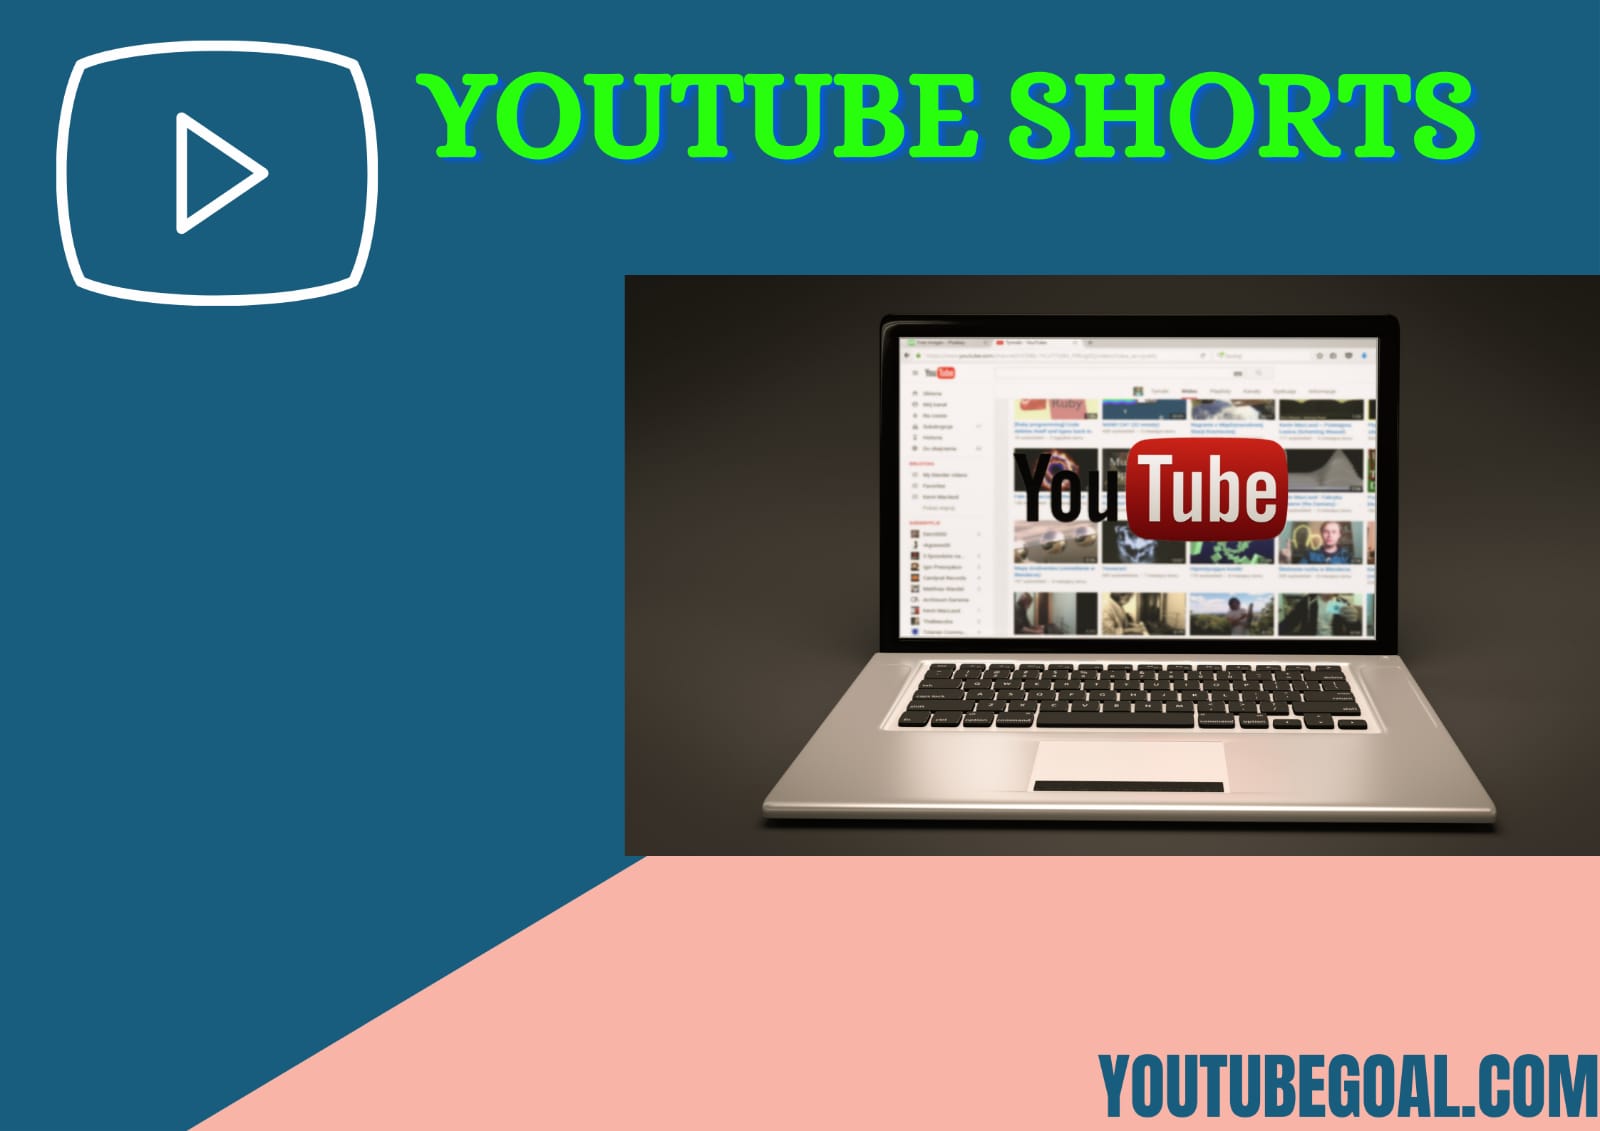 YouTube Shorts Videos - how to monetized and earn money?